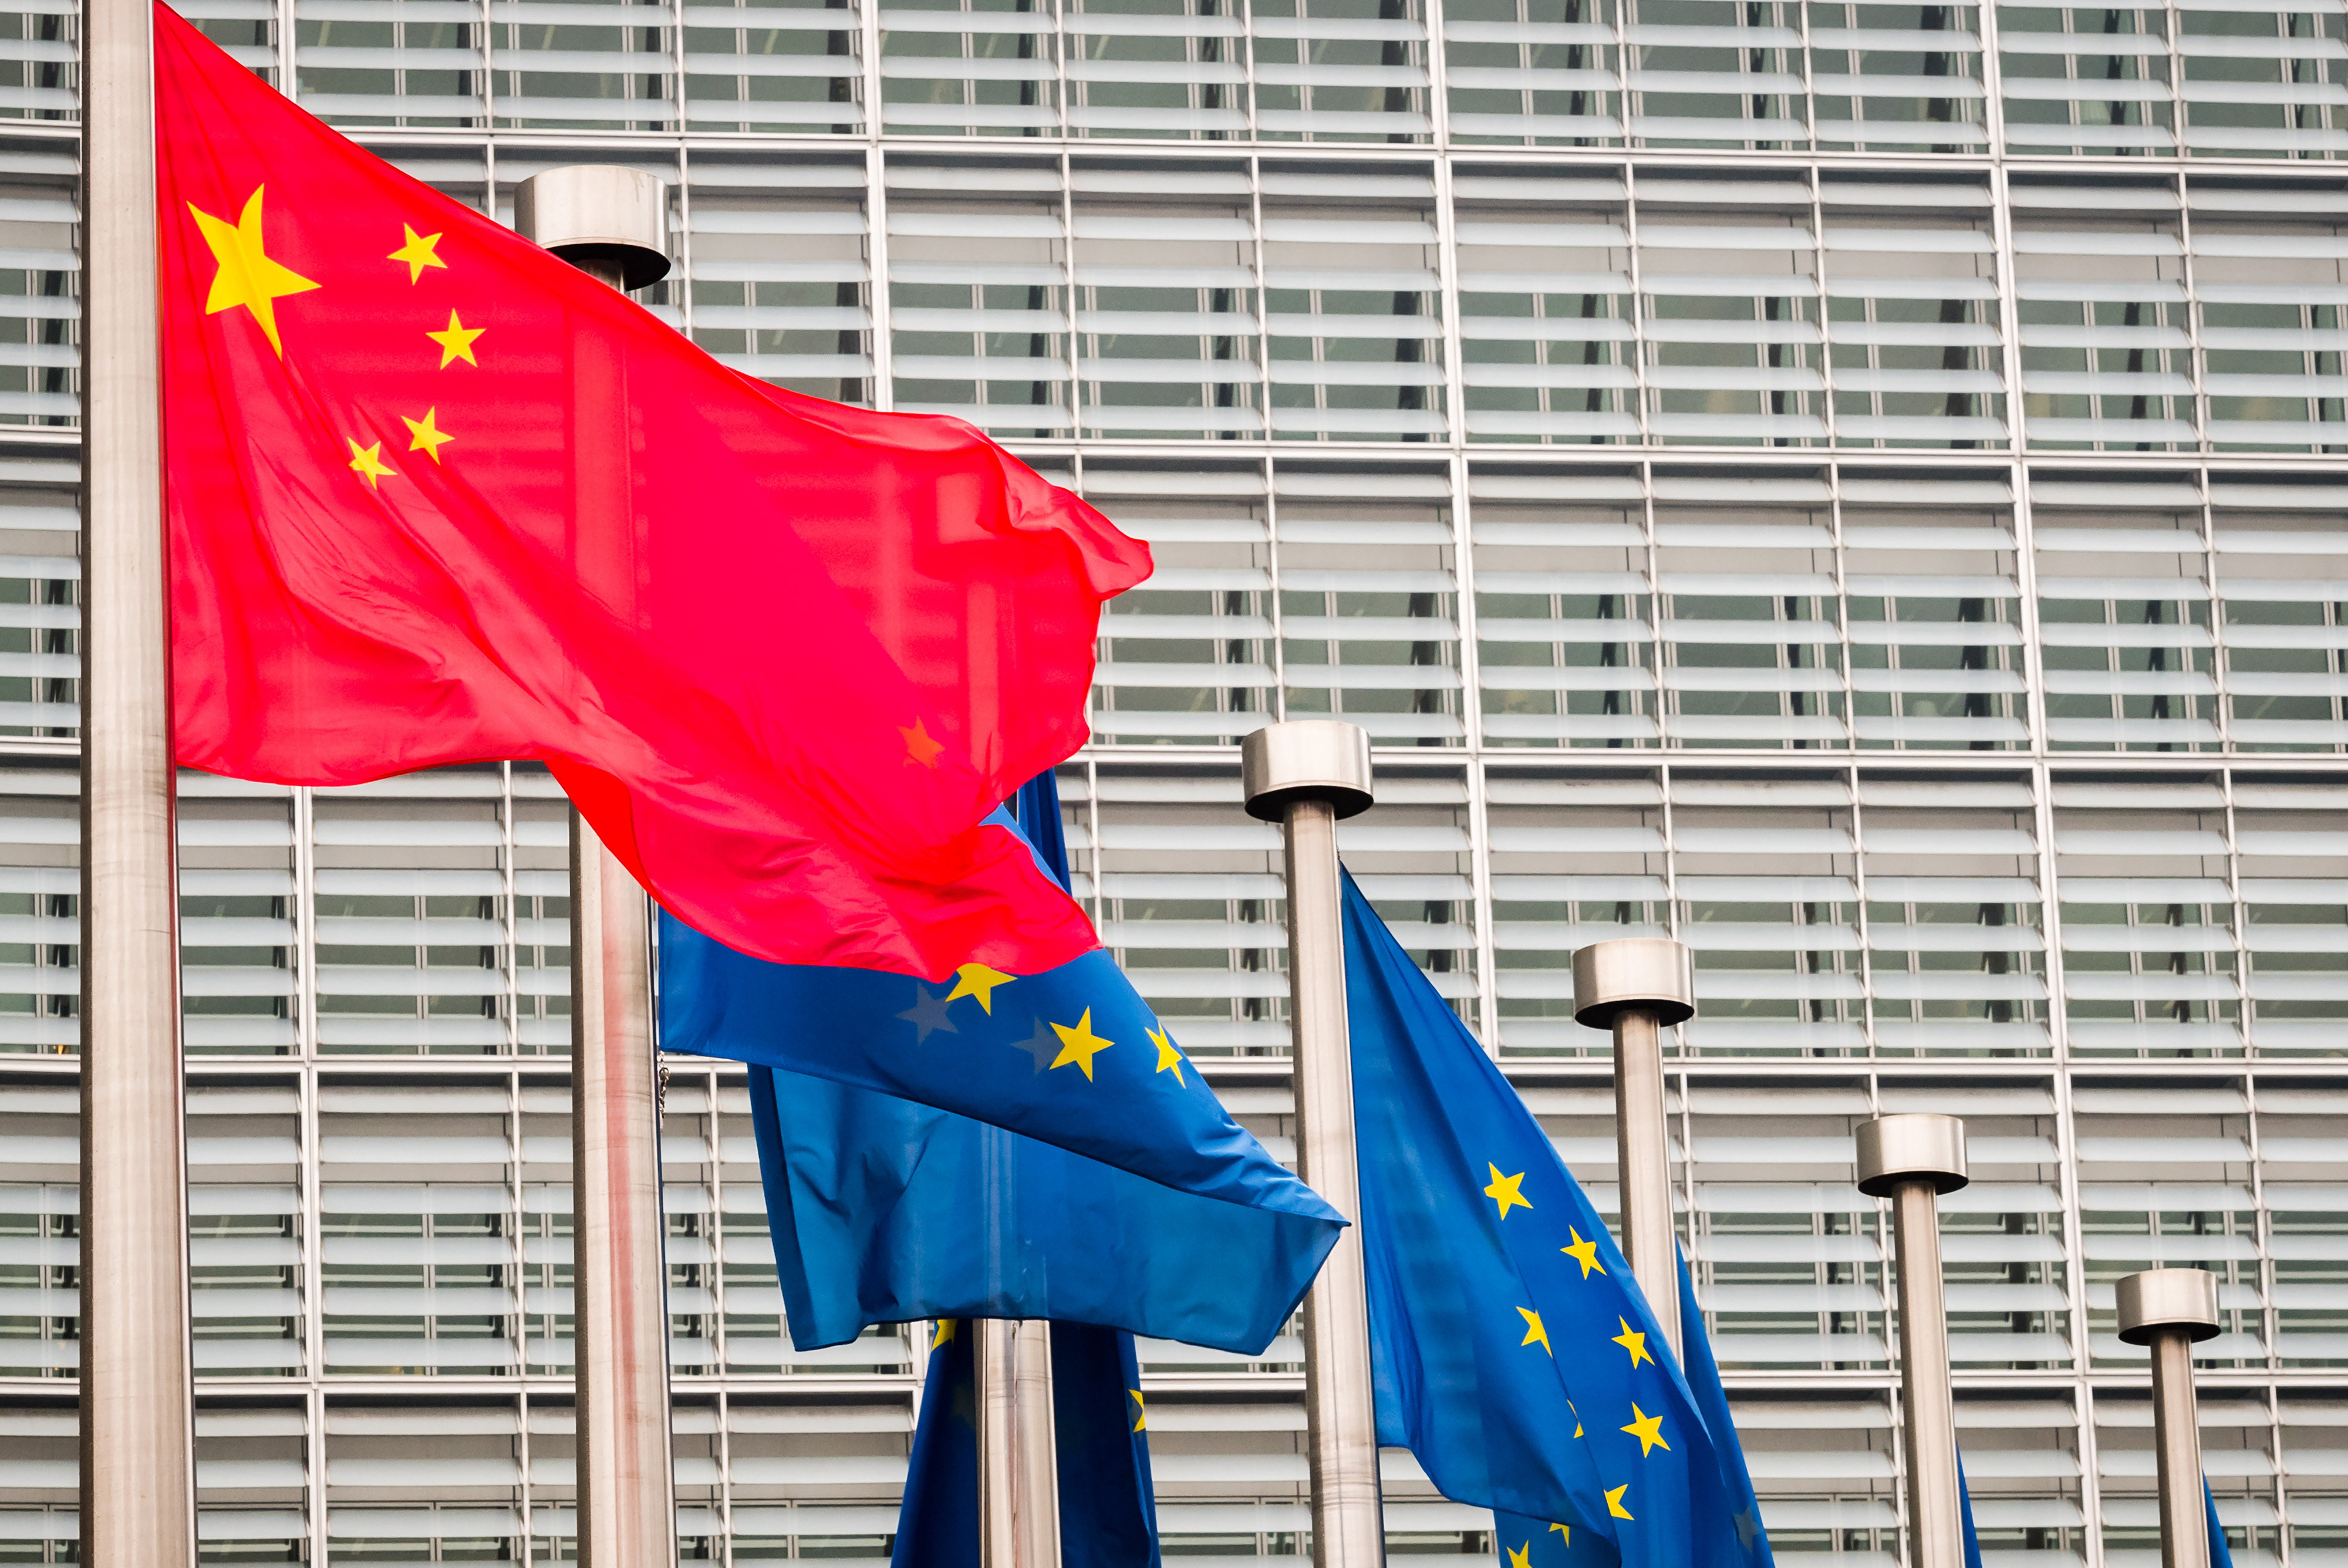 Beijing has faced growing scrutiny from the EU over its relationship with Moscow. Photo: Bloomberg